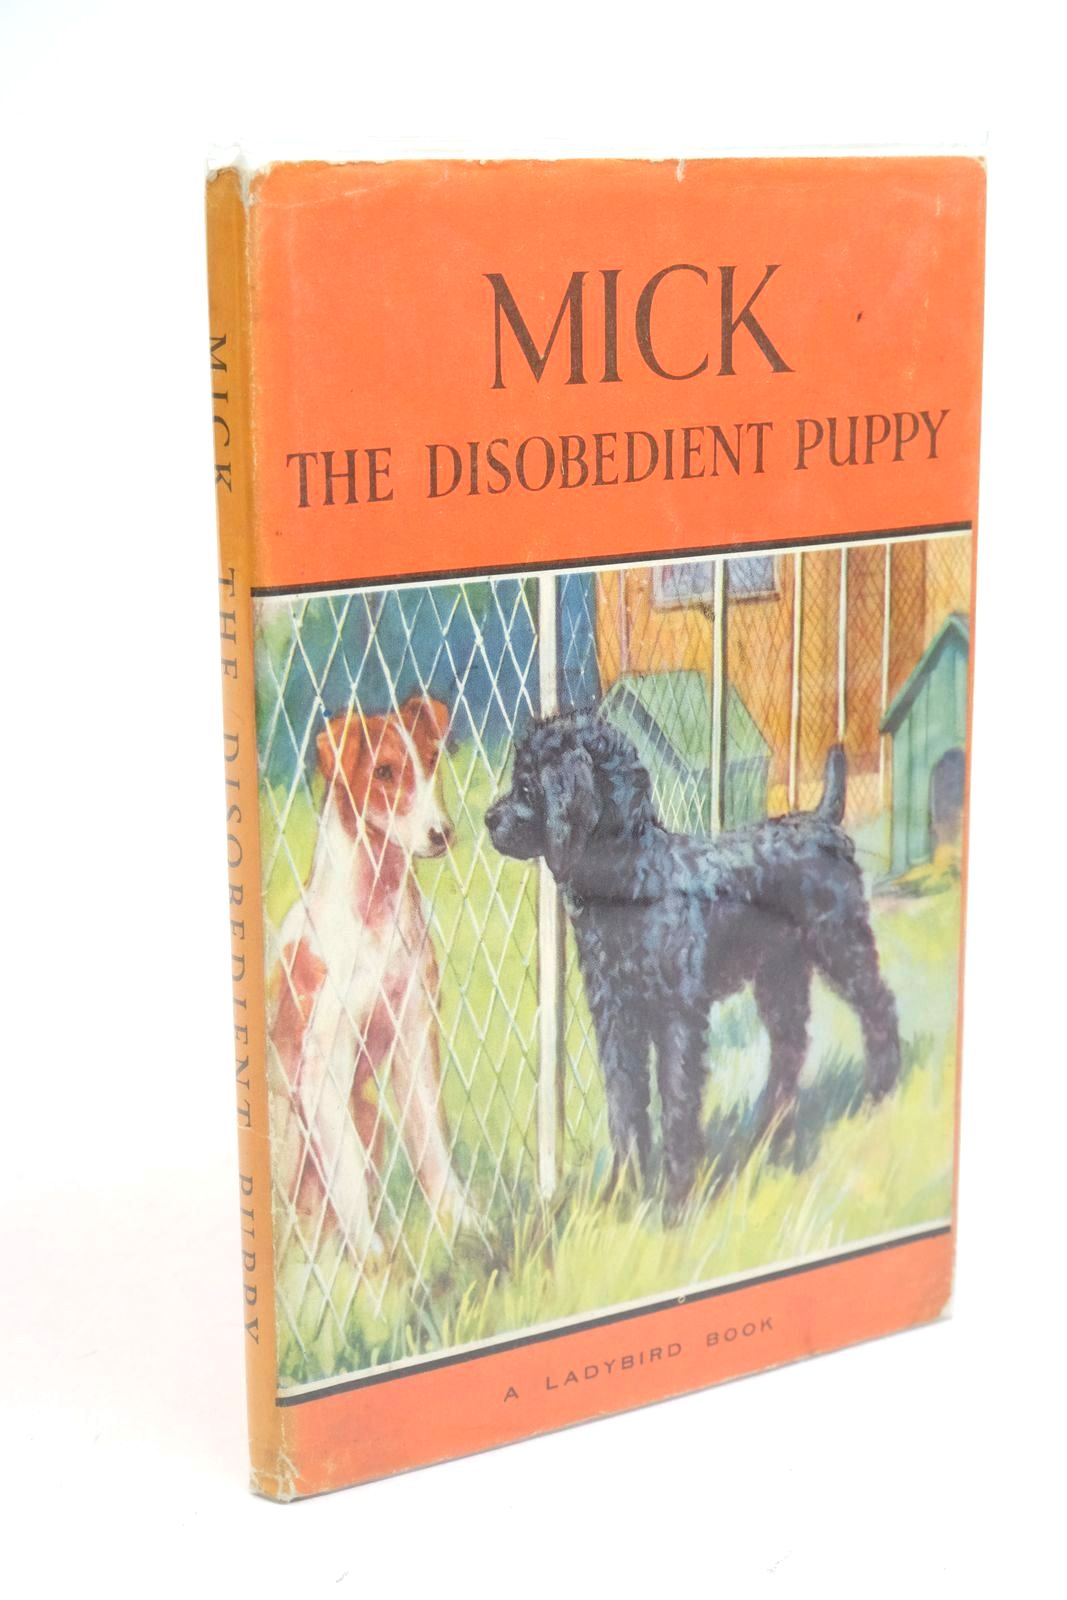 Photo of MICK THE DISOBEDIENT PUPPY written by Barr, Noel illustrated by Hickling, P.B. published by Wills & Hepworth Ltd. (STOCK CODE: 1322394)  for sale by Stella & Rose's Books